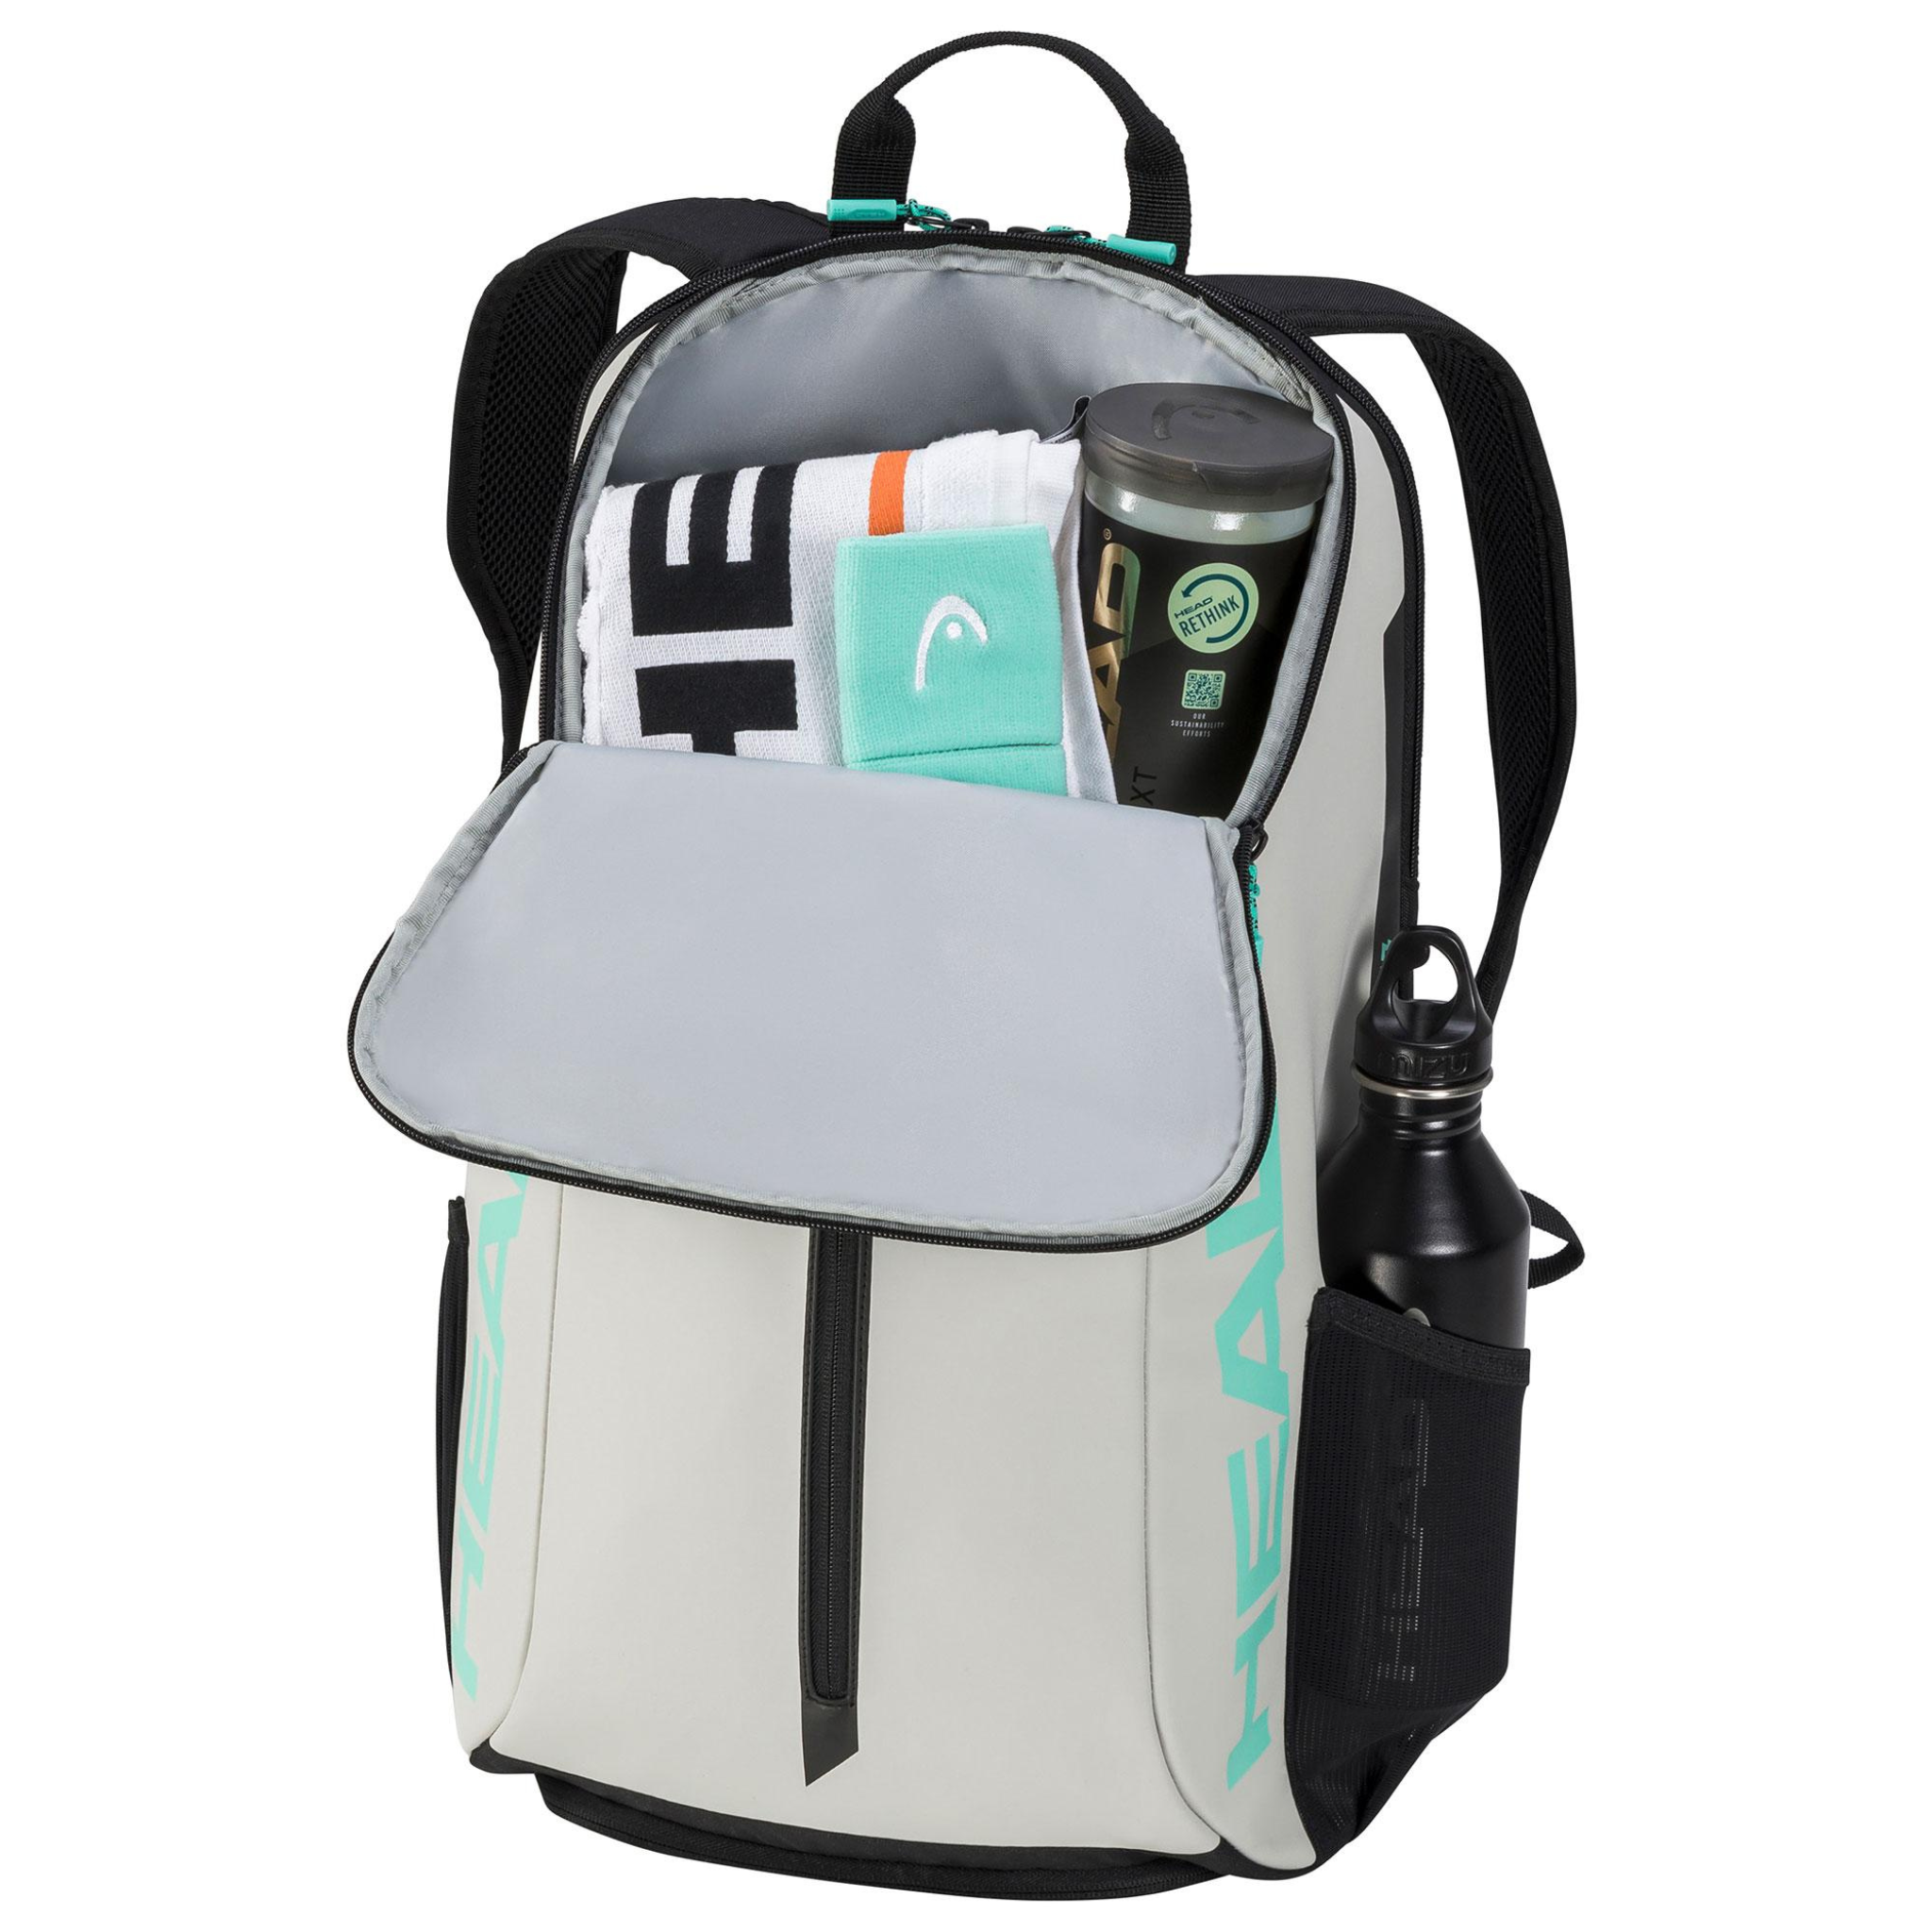 Head Tour 25L Backpack - Teal